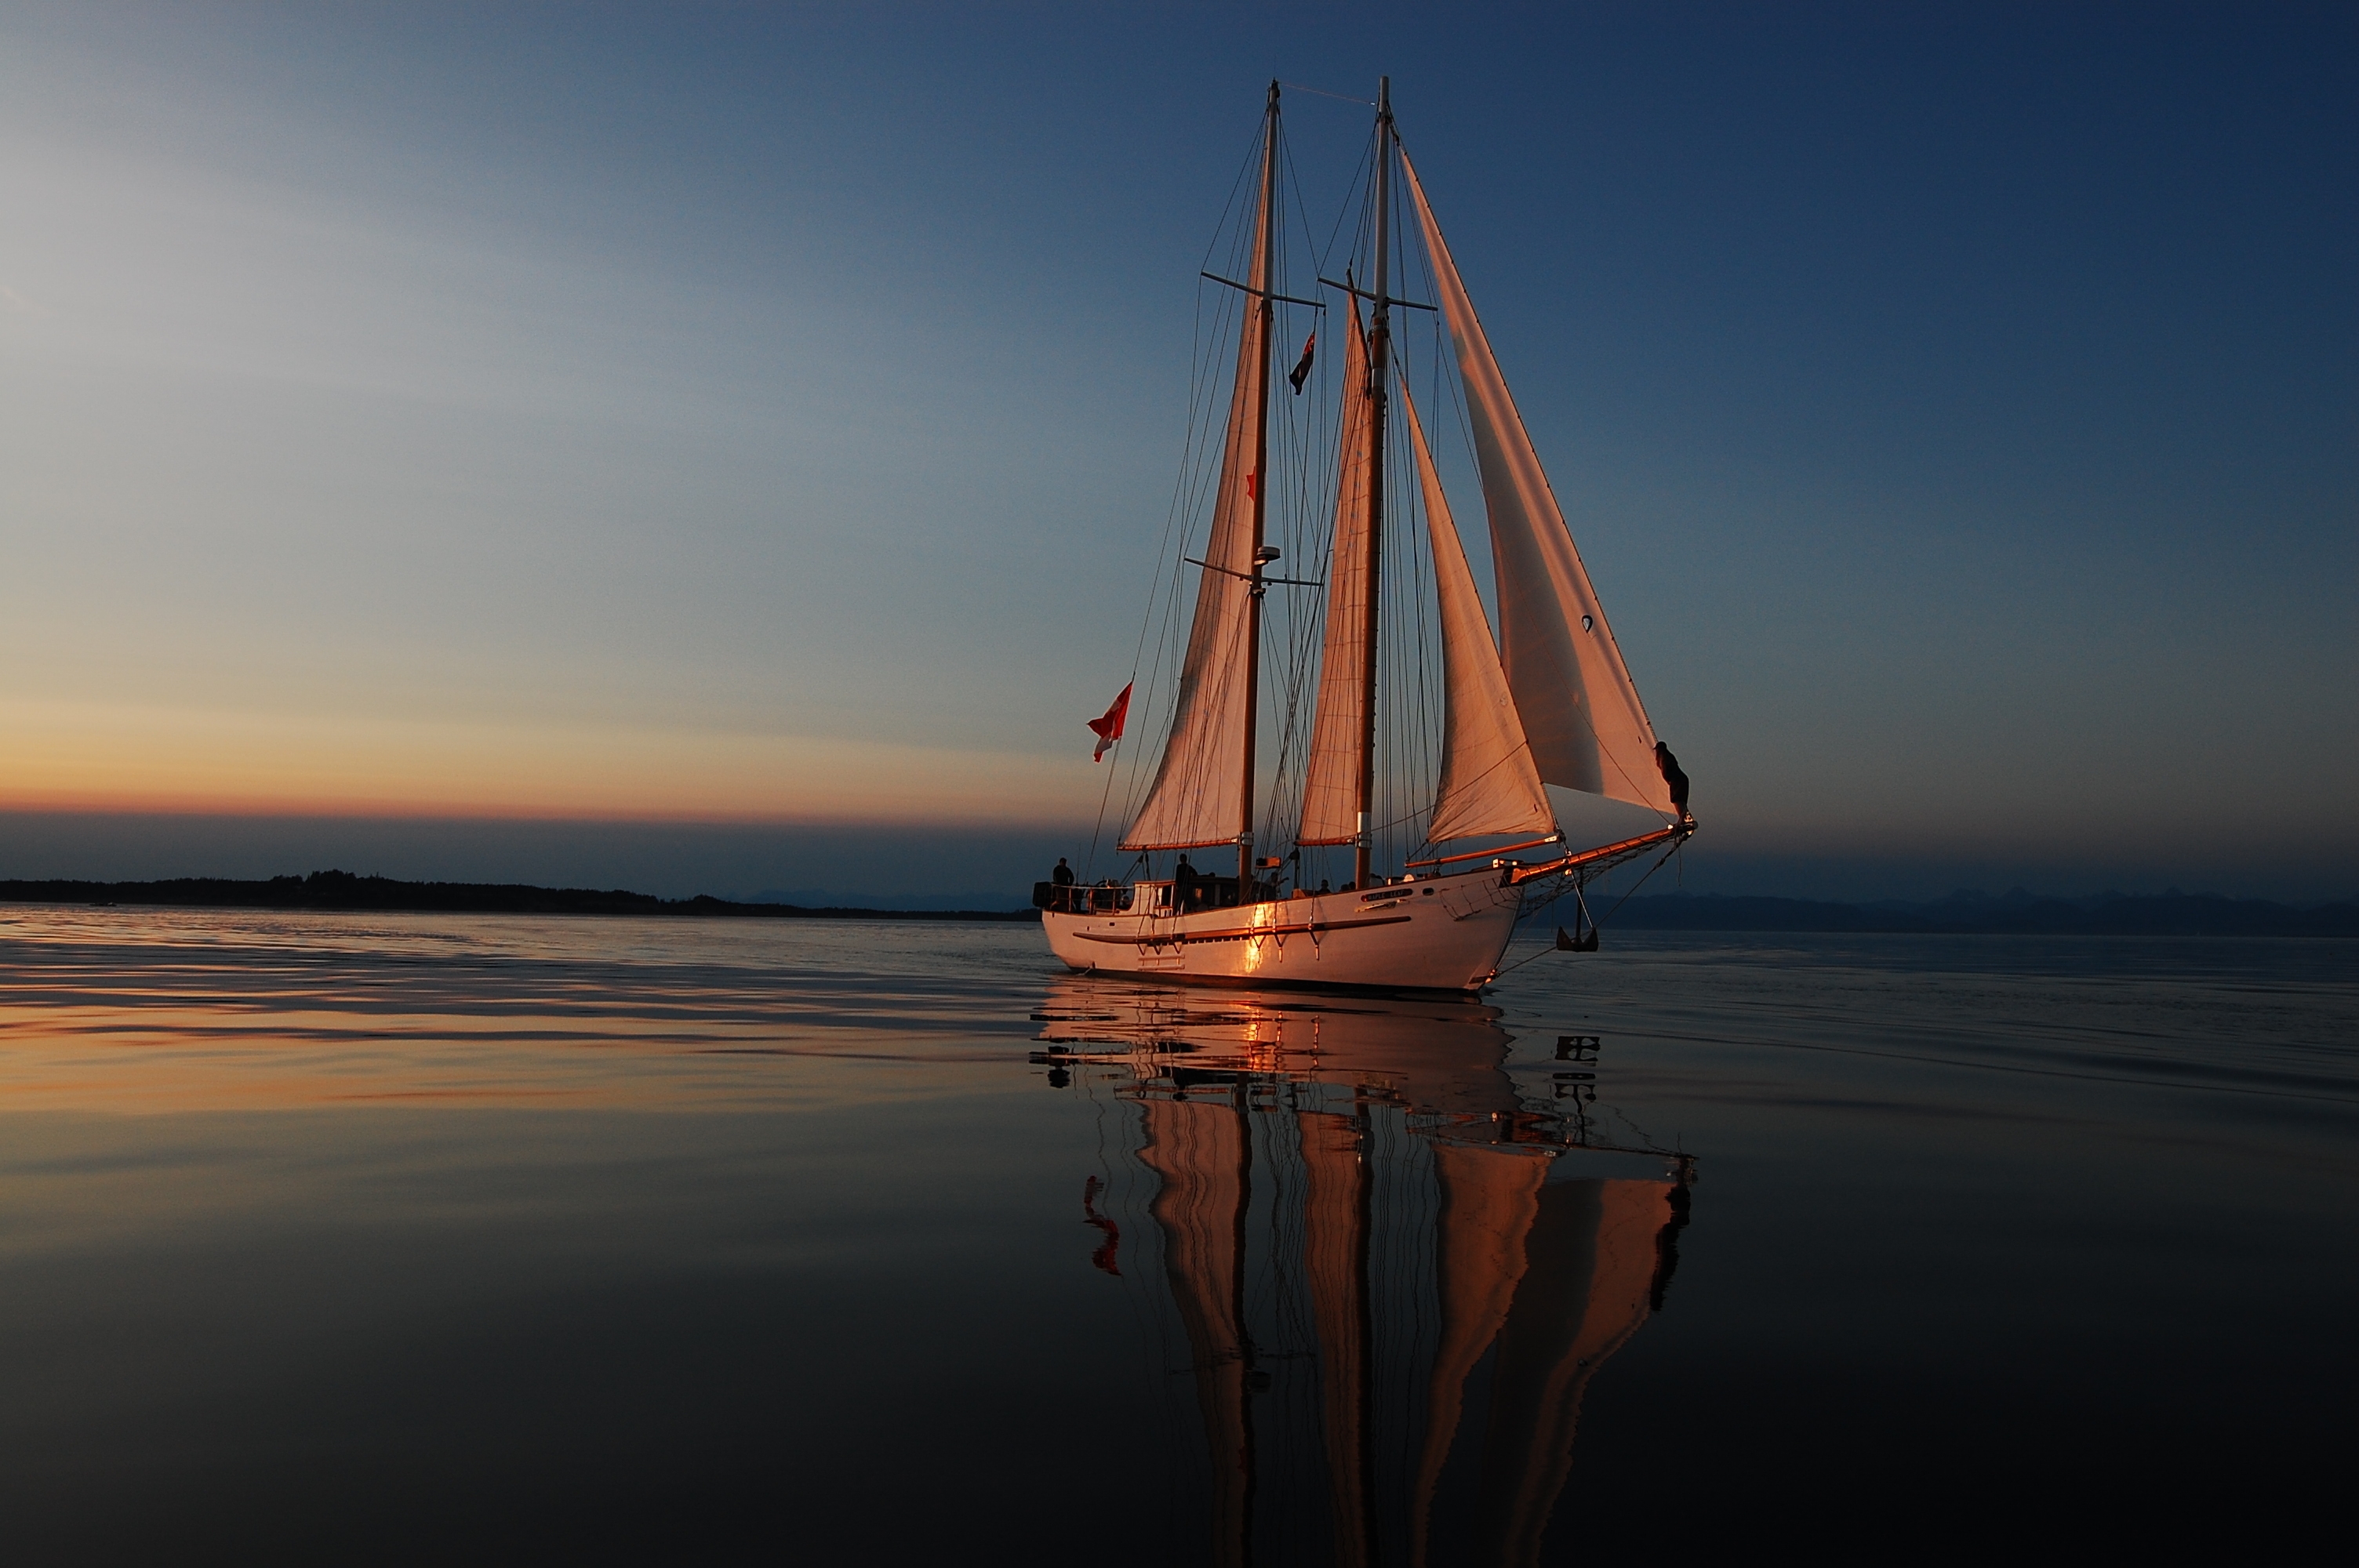 evening, yacht, relaxation, journey, sail, miscellanea, miscellaneous, sails, sea, rest, reflections of the sunset, gleams of the sunset